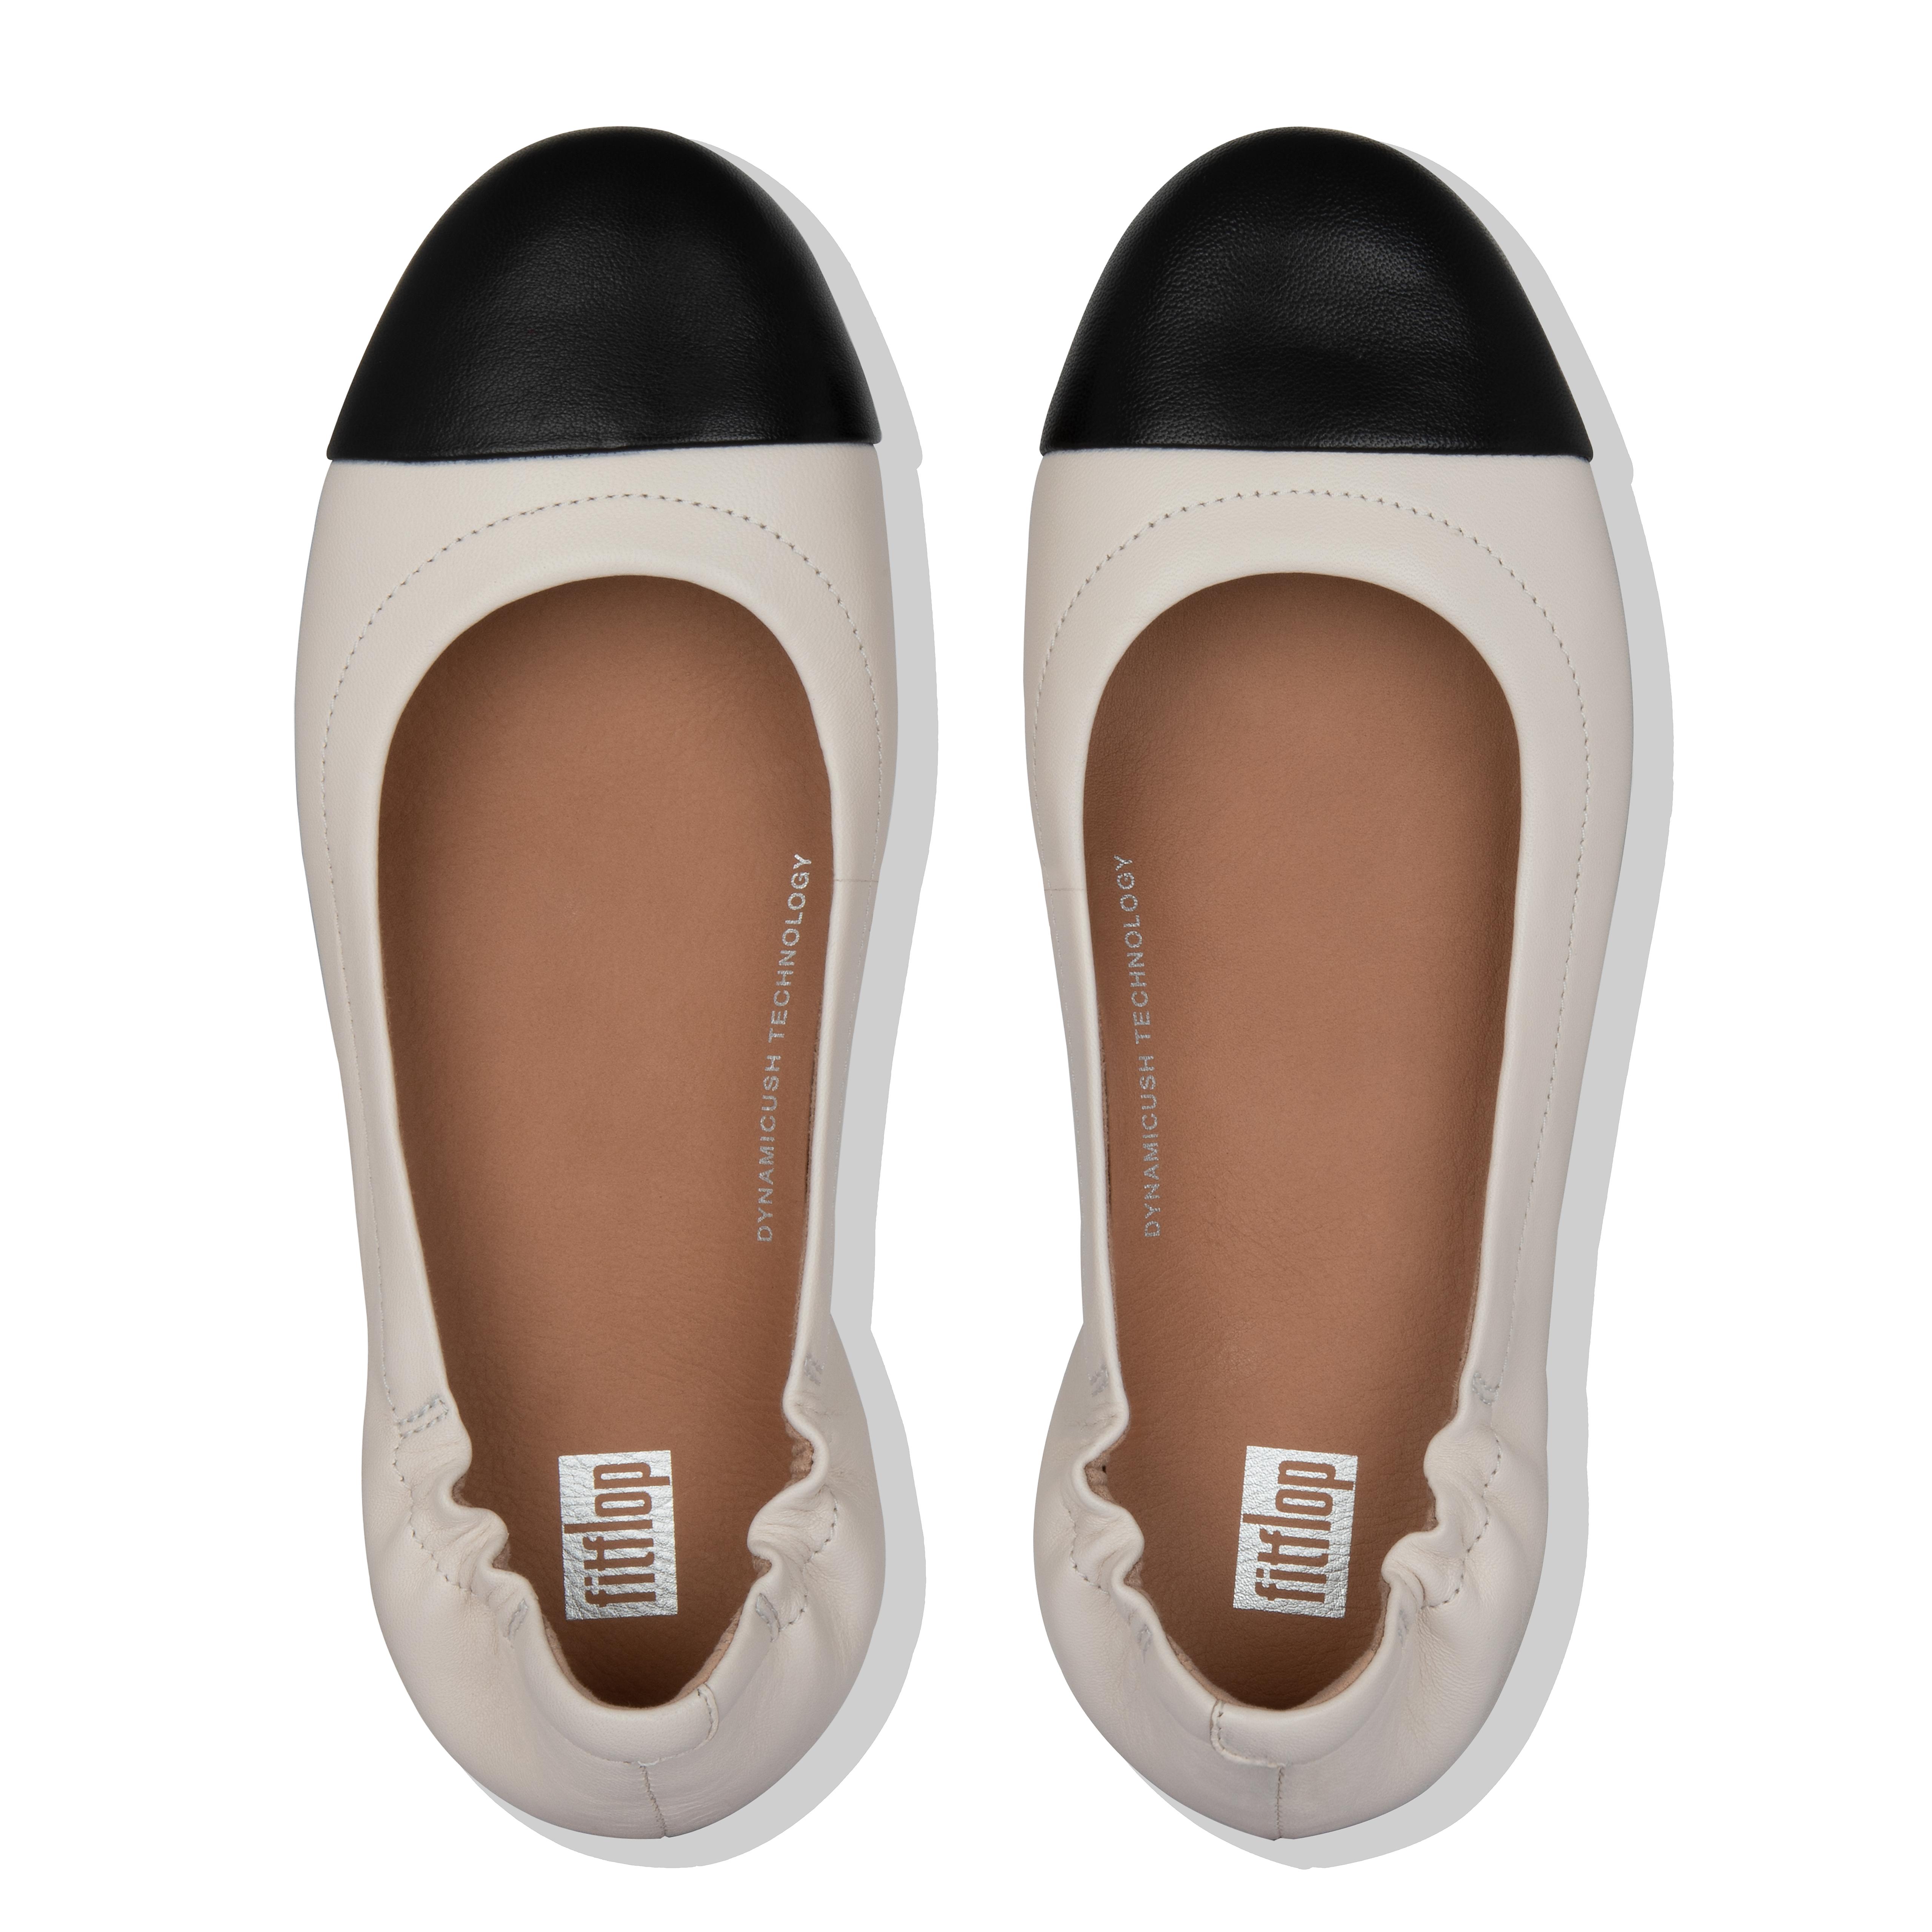 fitflop ballet shoes